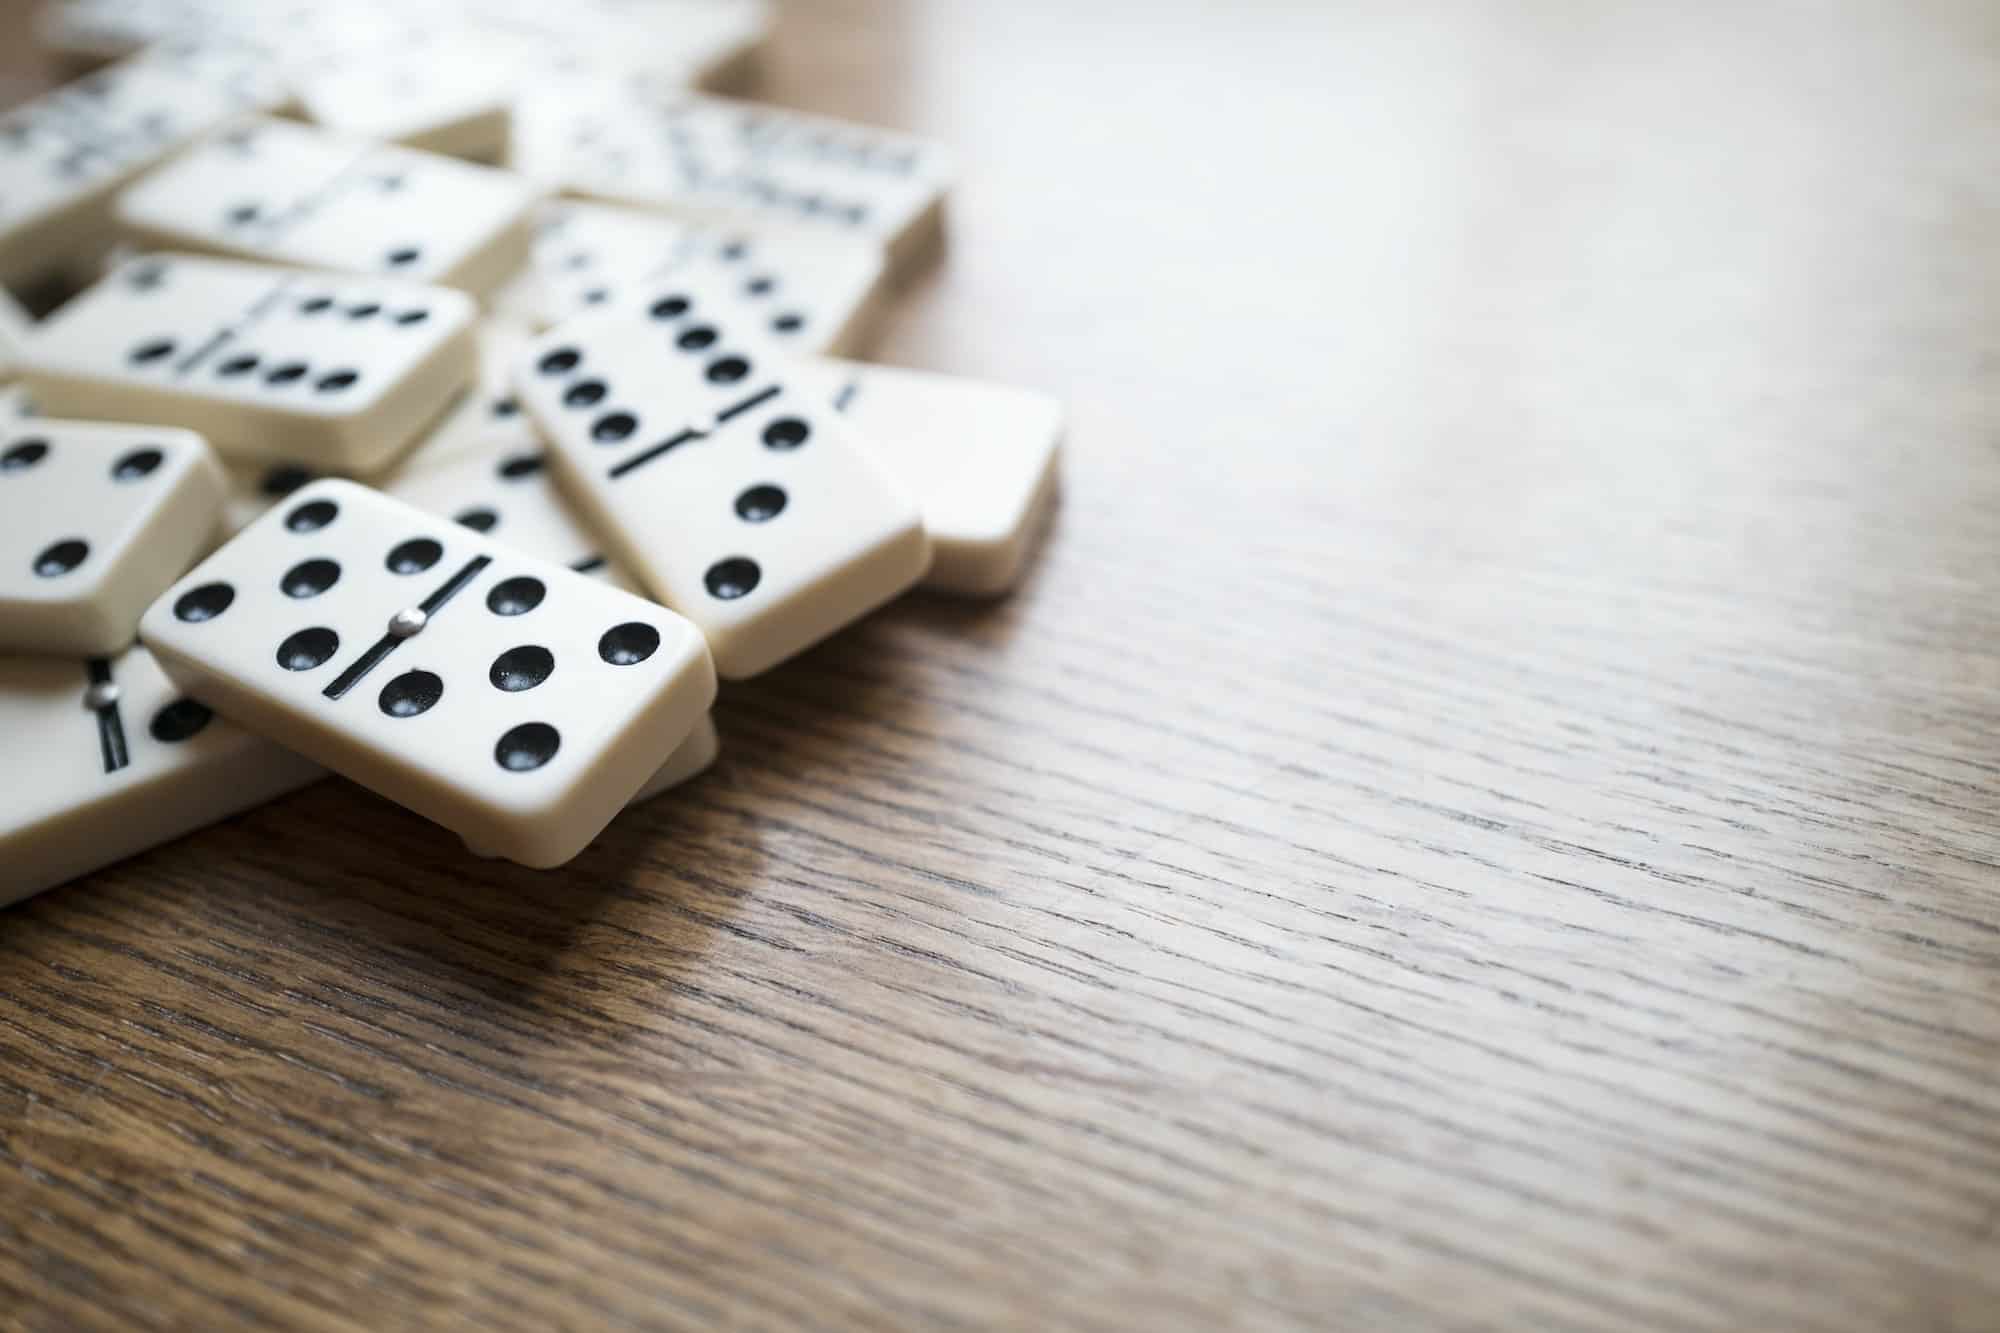 Domino Game, Dominoes On Wooden Table